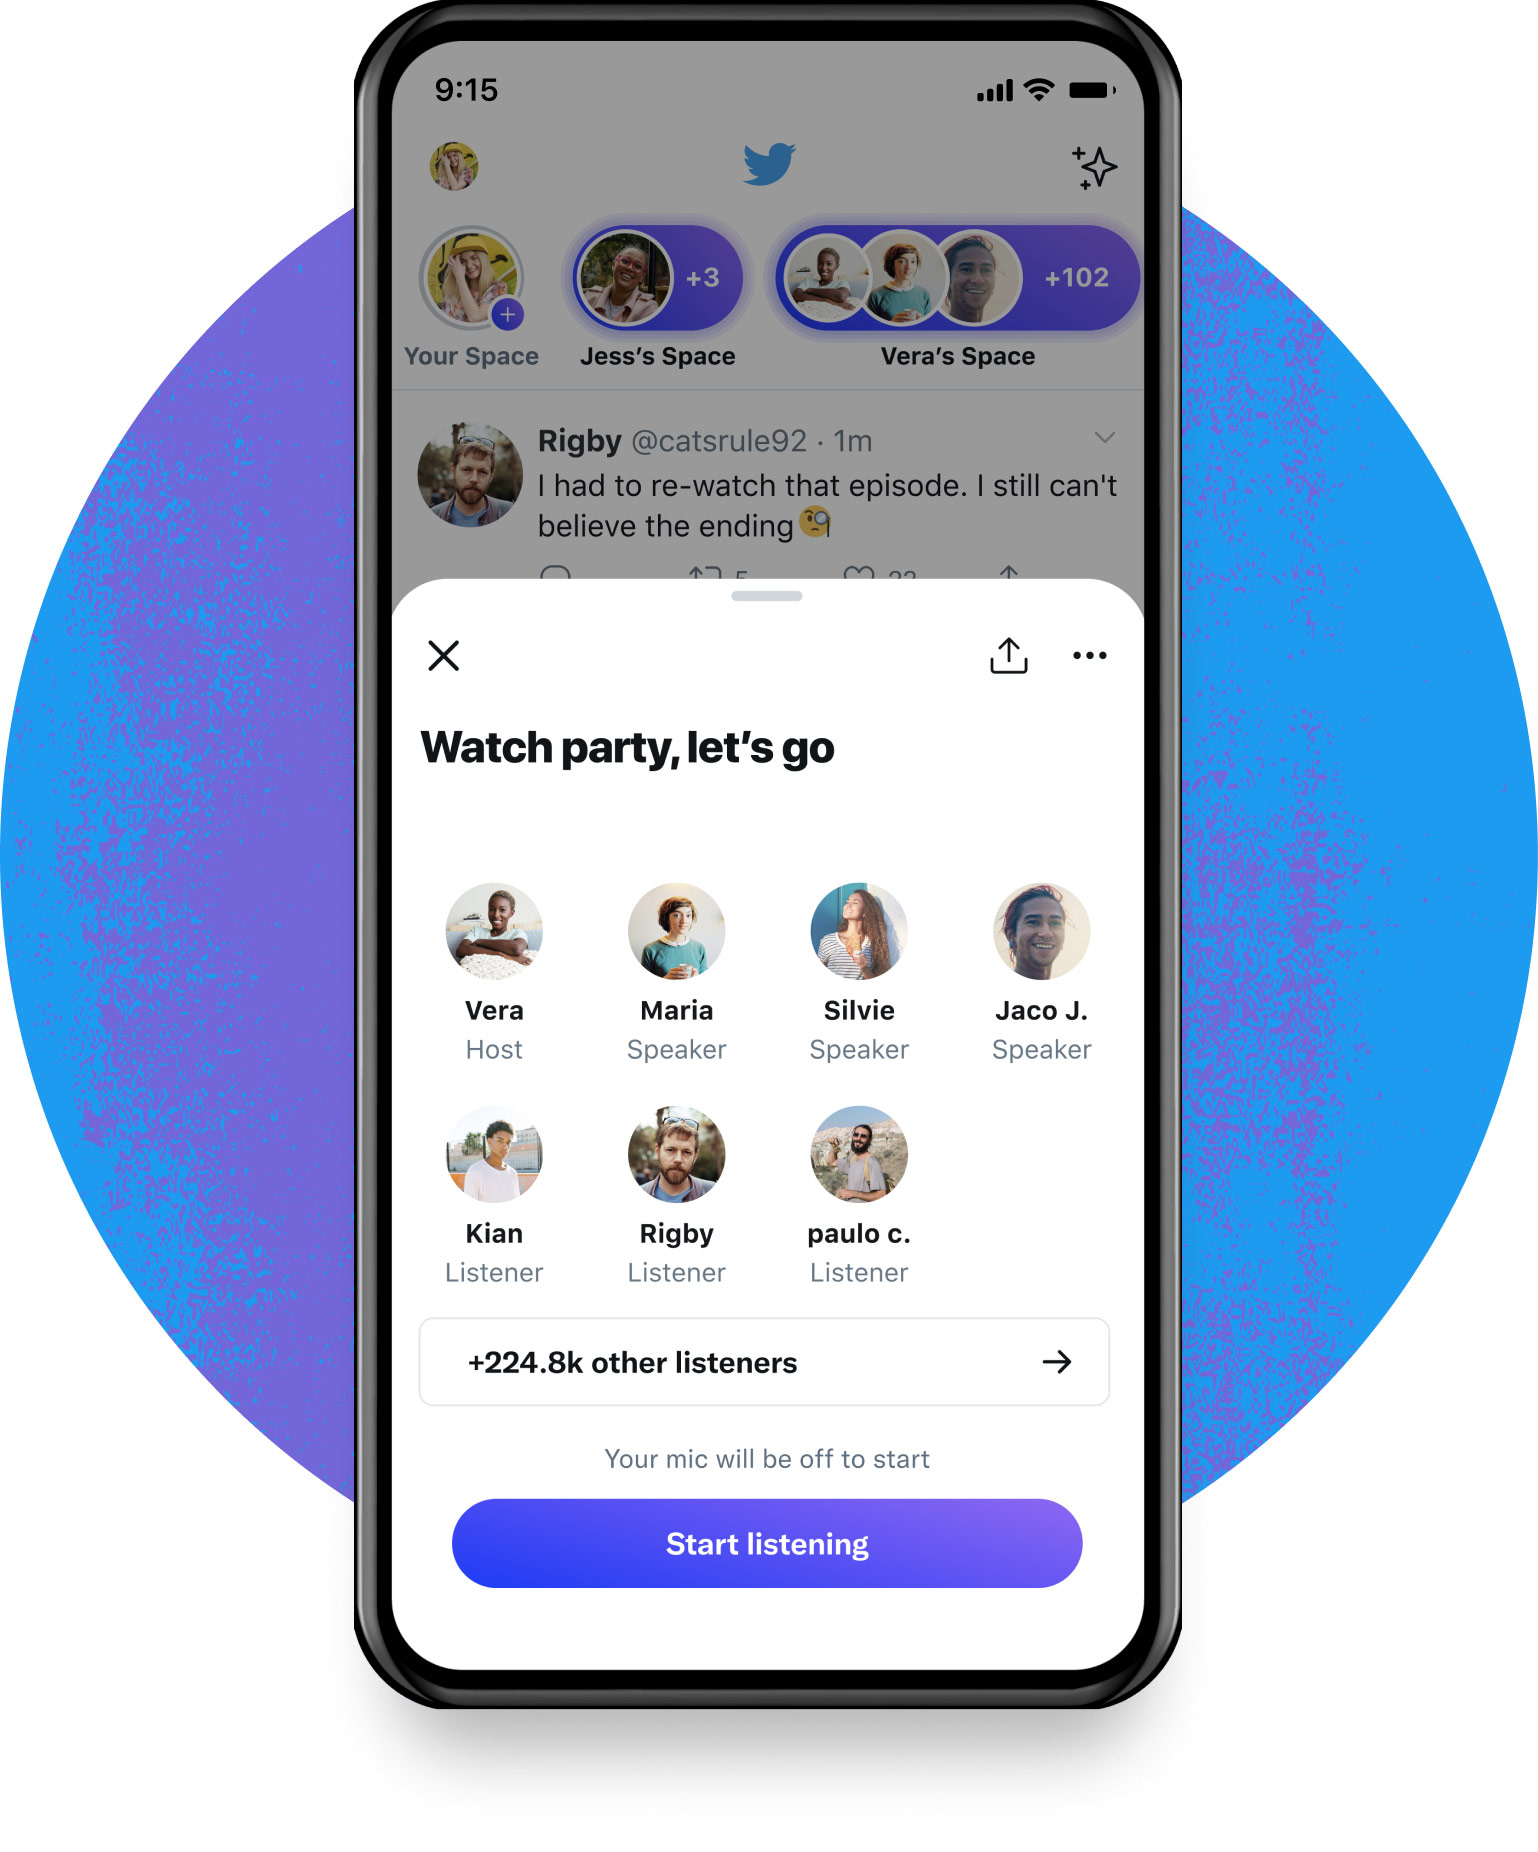 Twitter Spaces help creators connect with new audiences